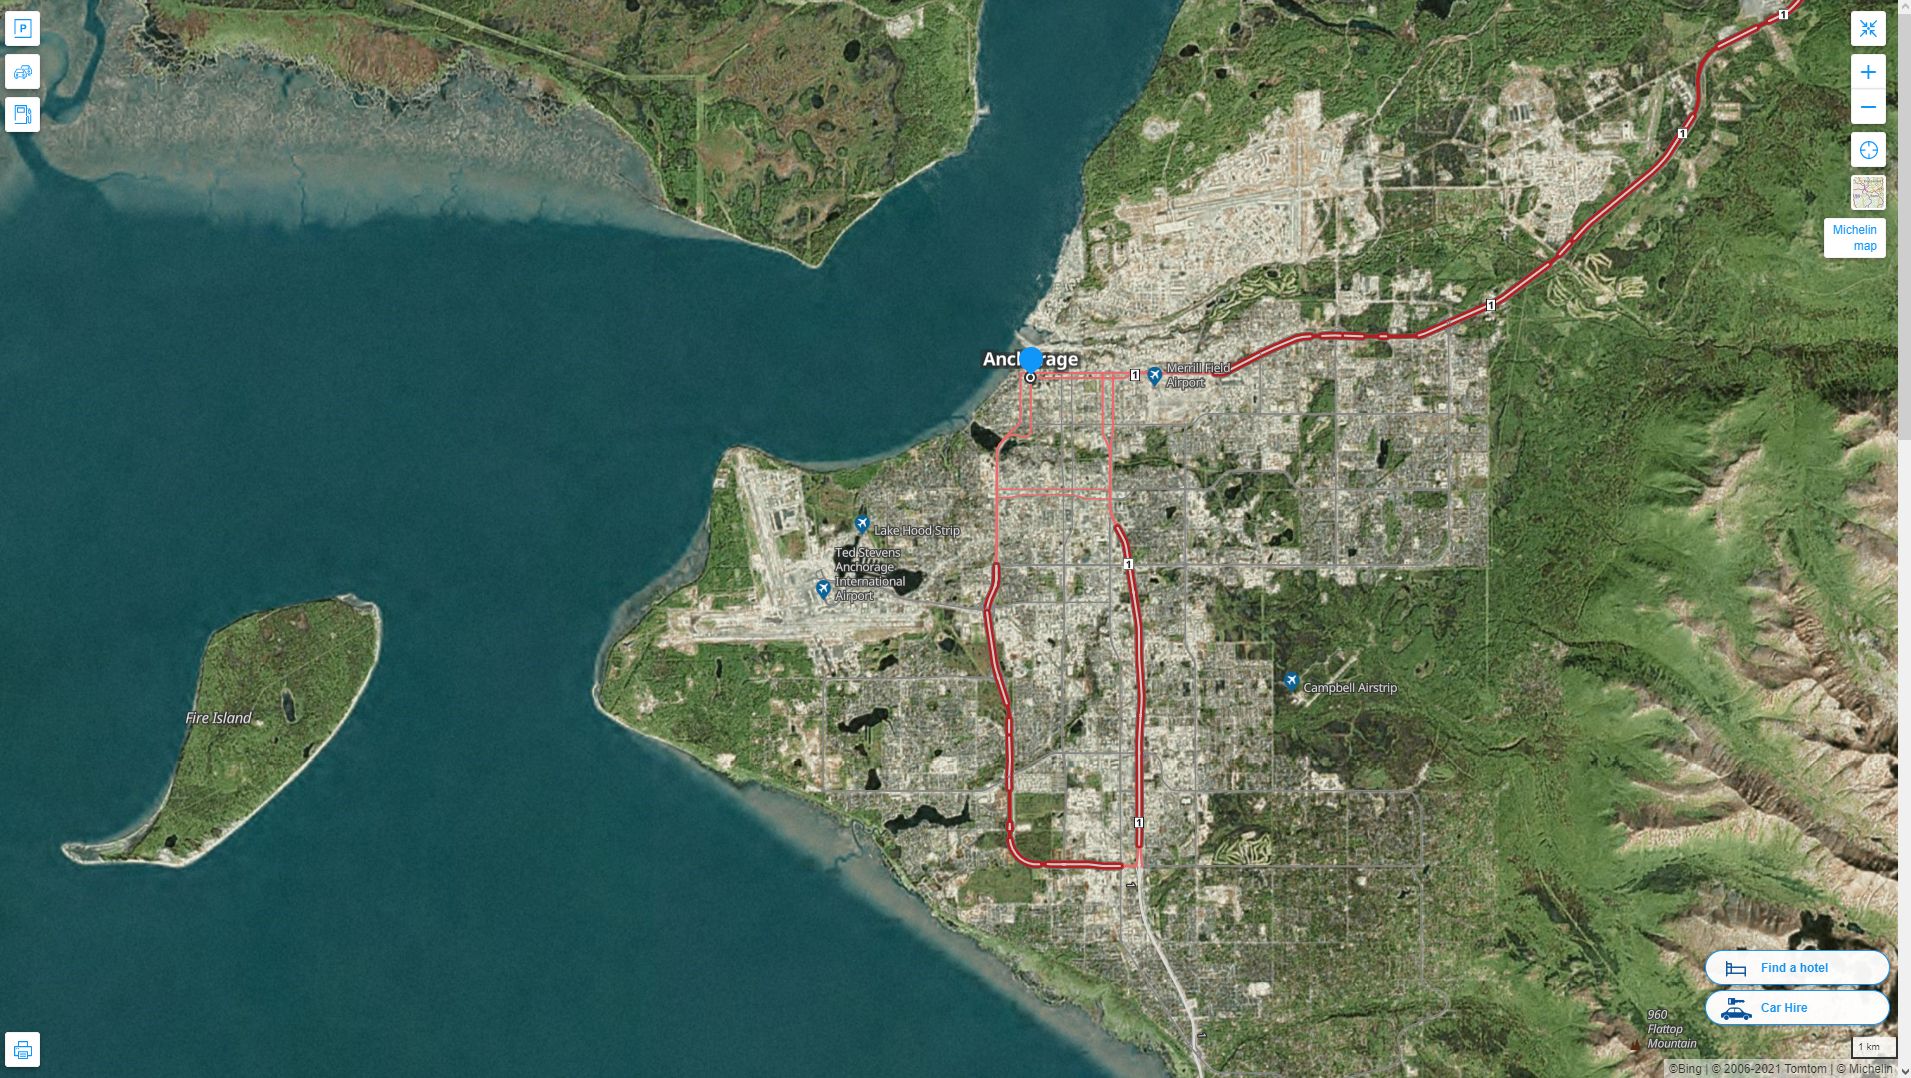 Anchorage Alaska Highway and Road Map with Satellite View